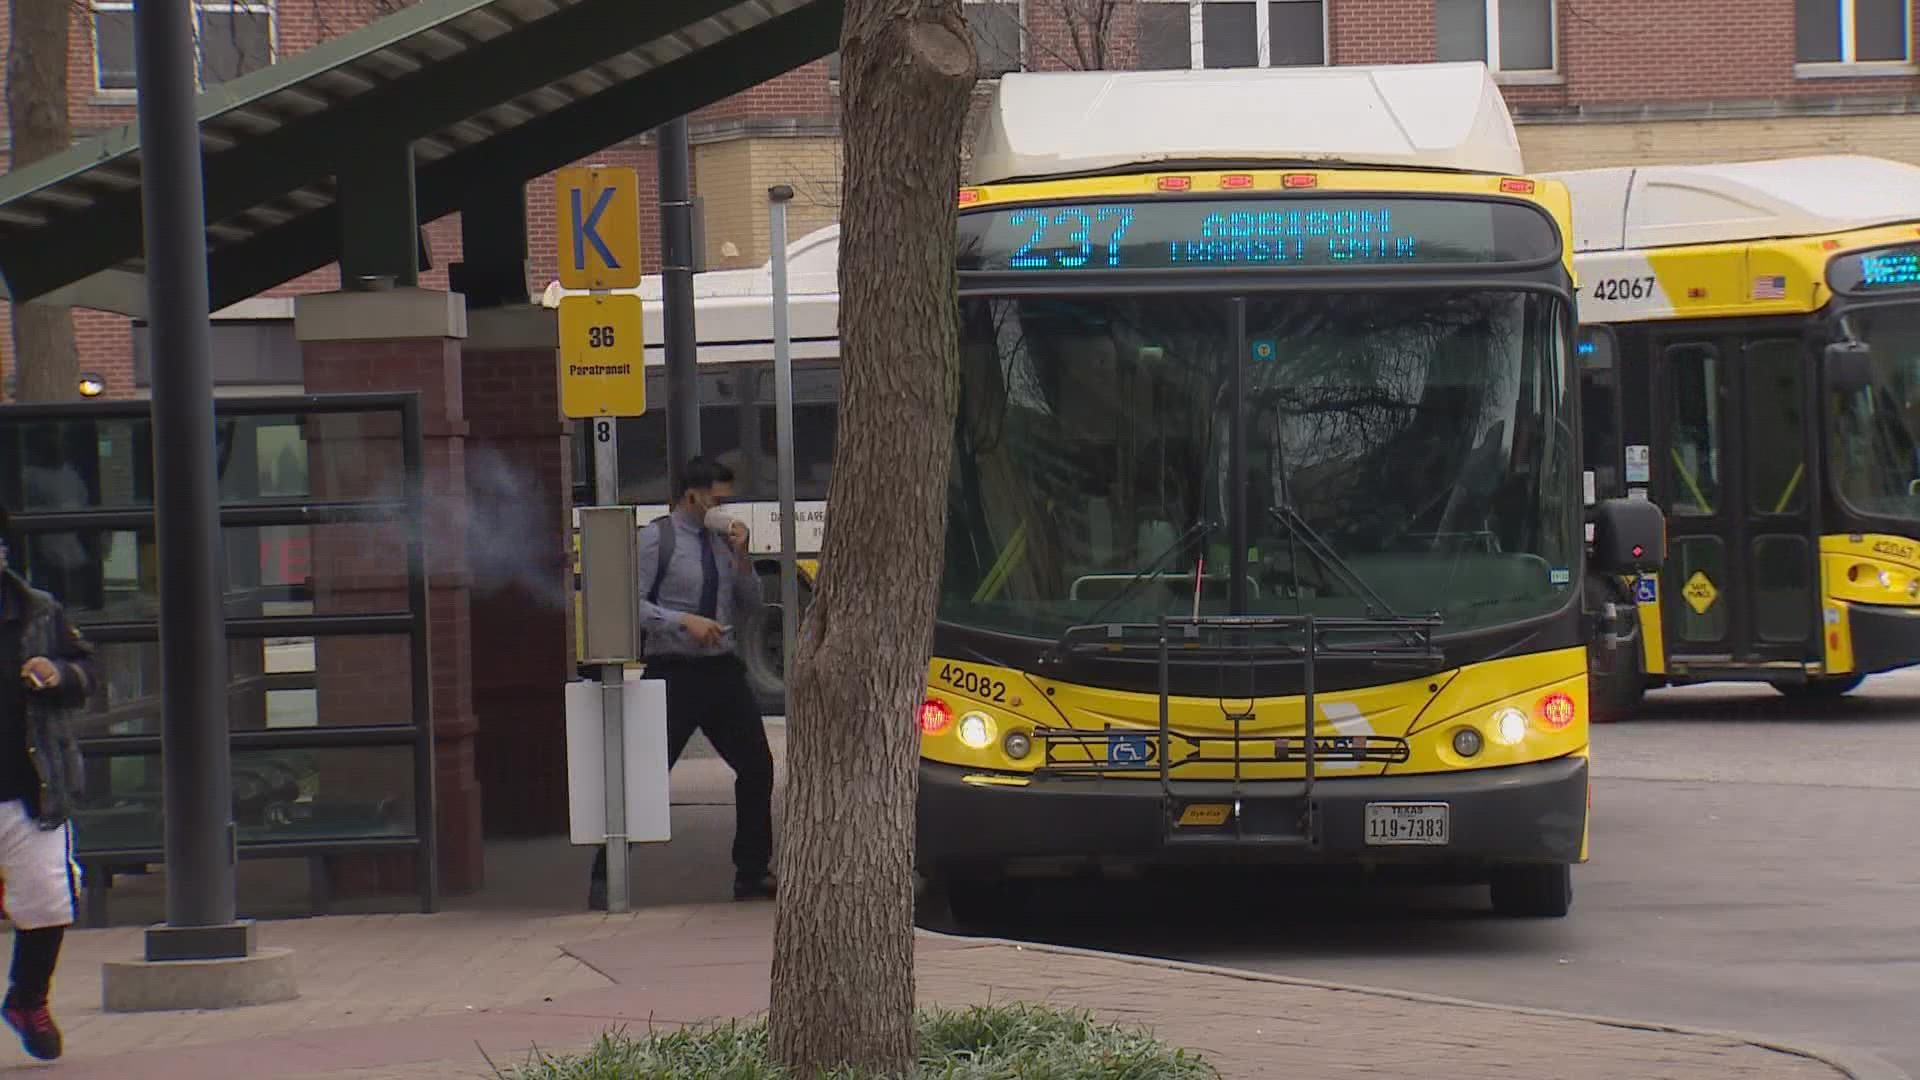 DART is offering free rides, so people can get used to the new routes.